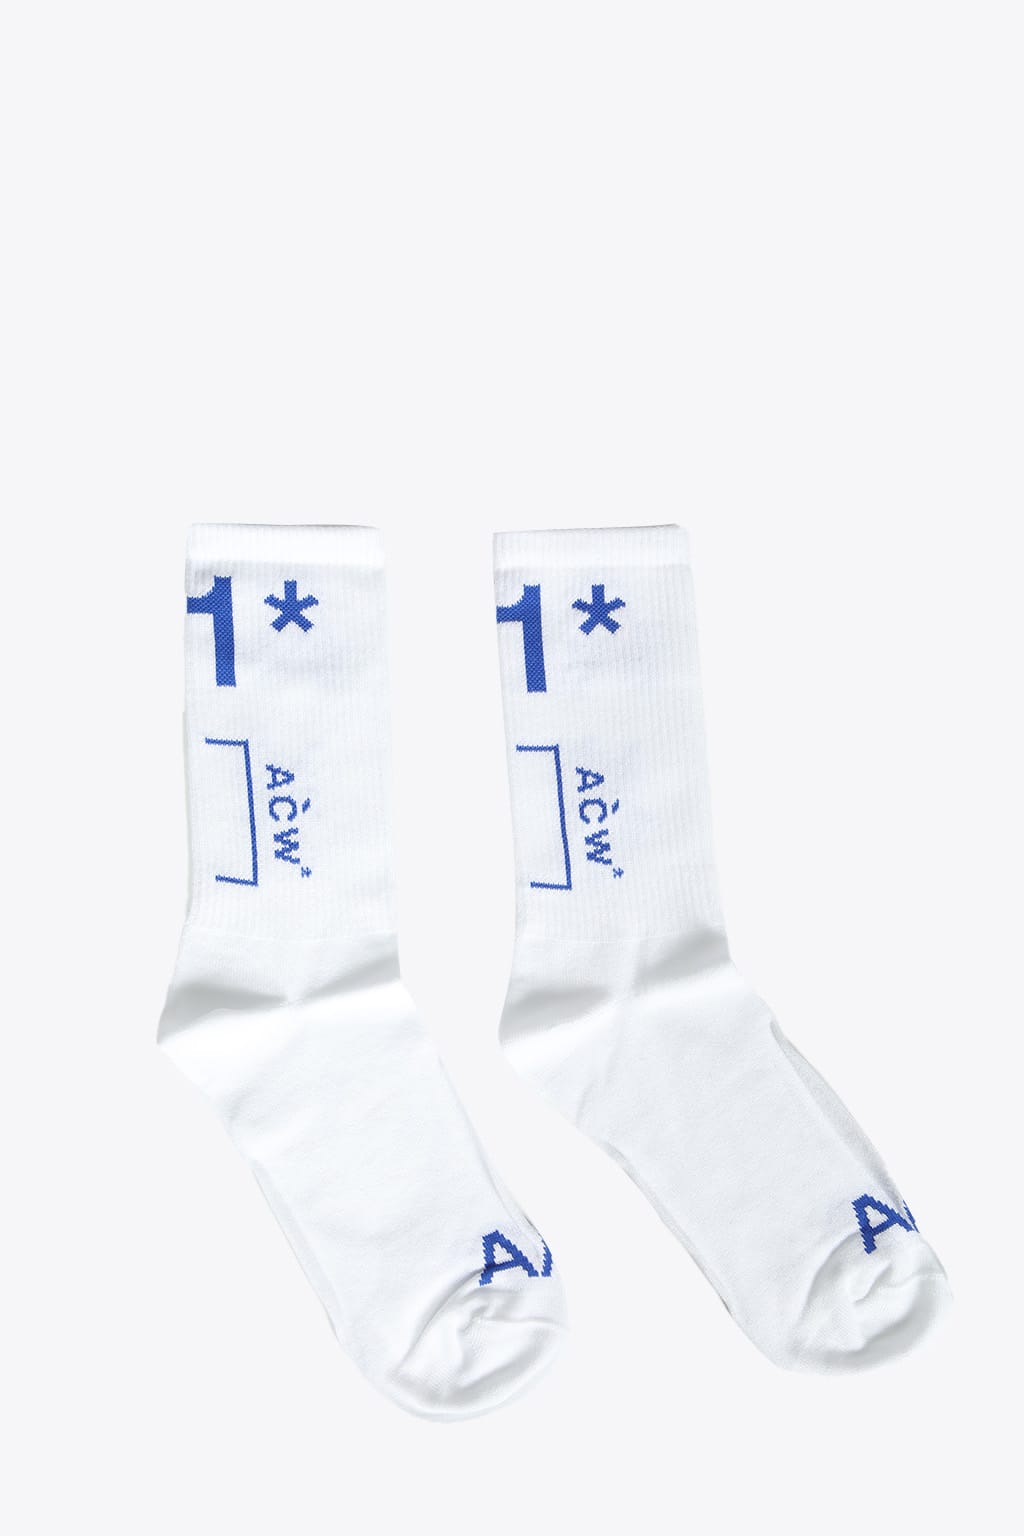 A-COLD-WALL Knitted Jacquard Sock White ribbed socks with blue logo